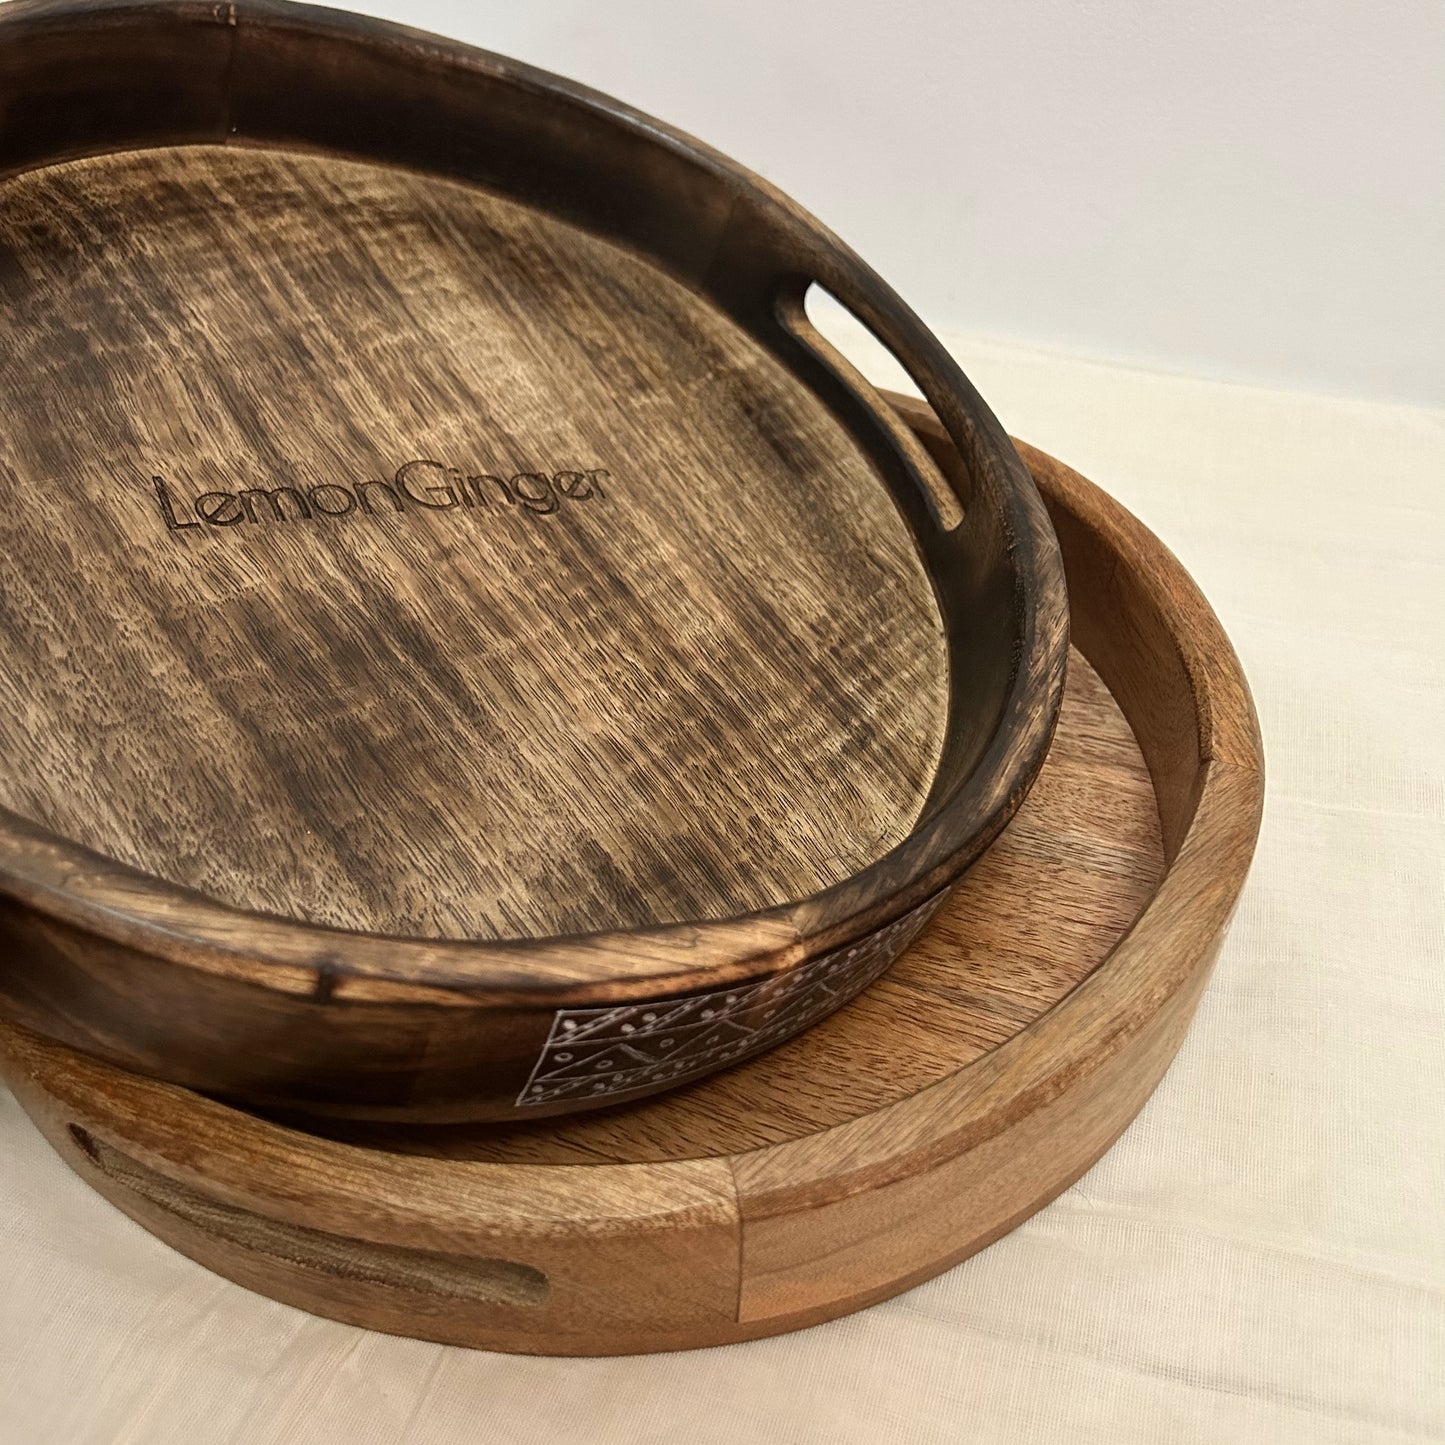 LEMONGINGER Wooden Round Tray for Serving | Breakfast Tea Coffee Serving Trays | Serving Tray for Bed Coffee, Snacks